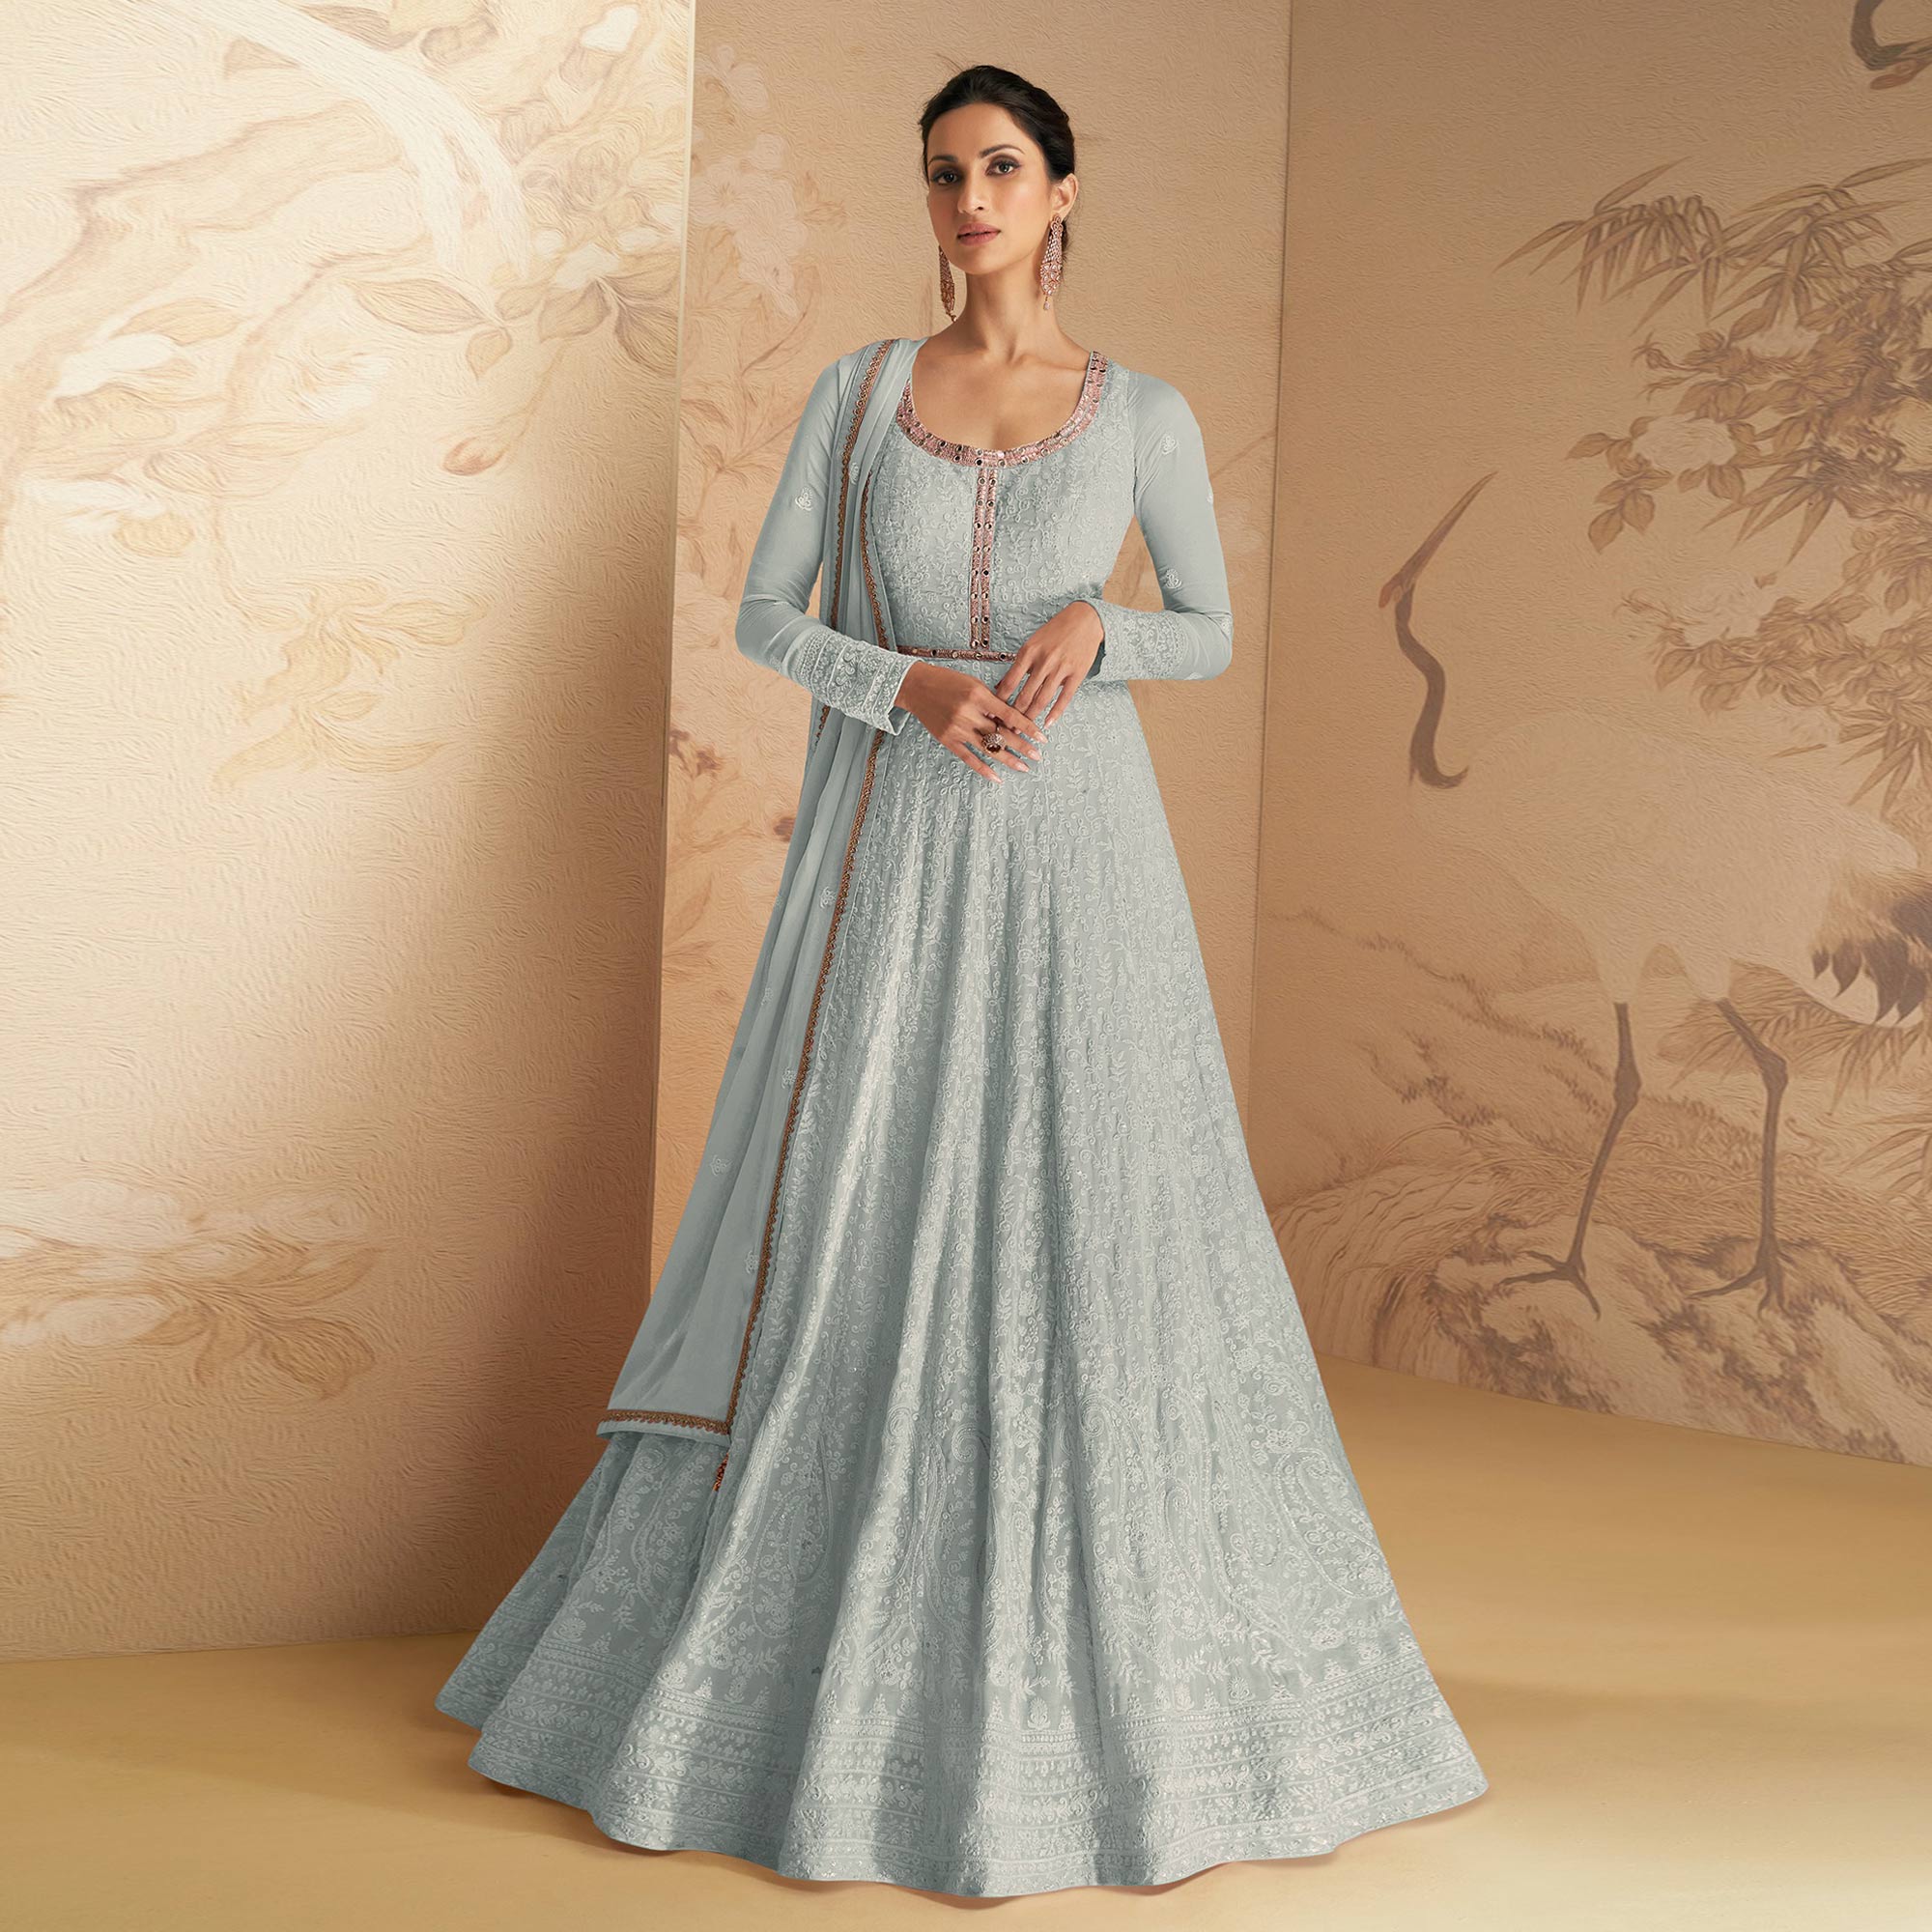 Light Turquoise Floral Embroidered Georgette Semi Stitched Anarkali Suit